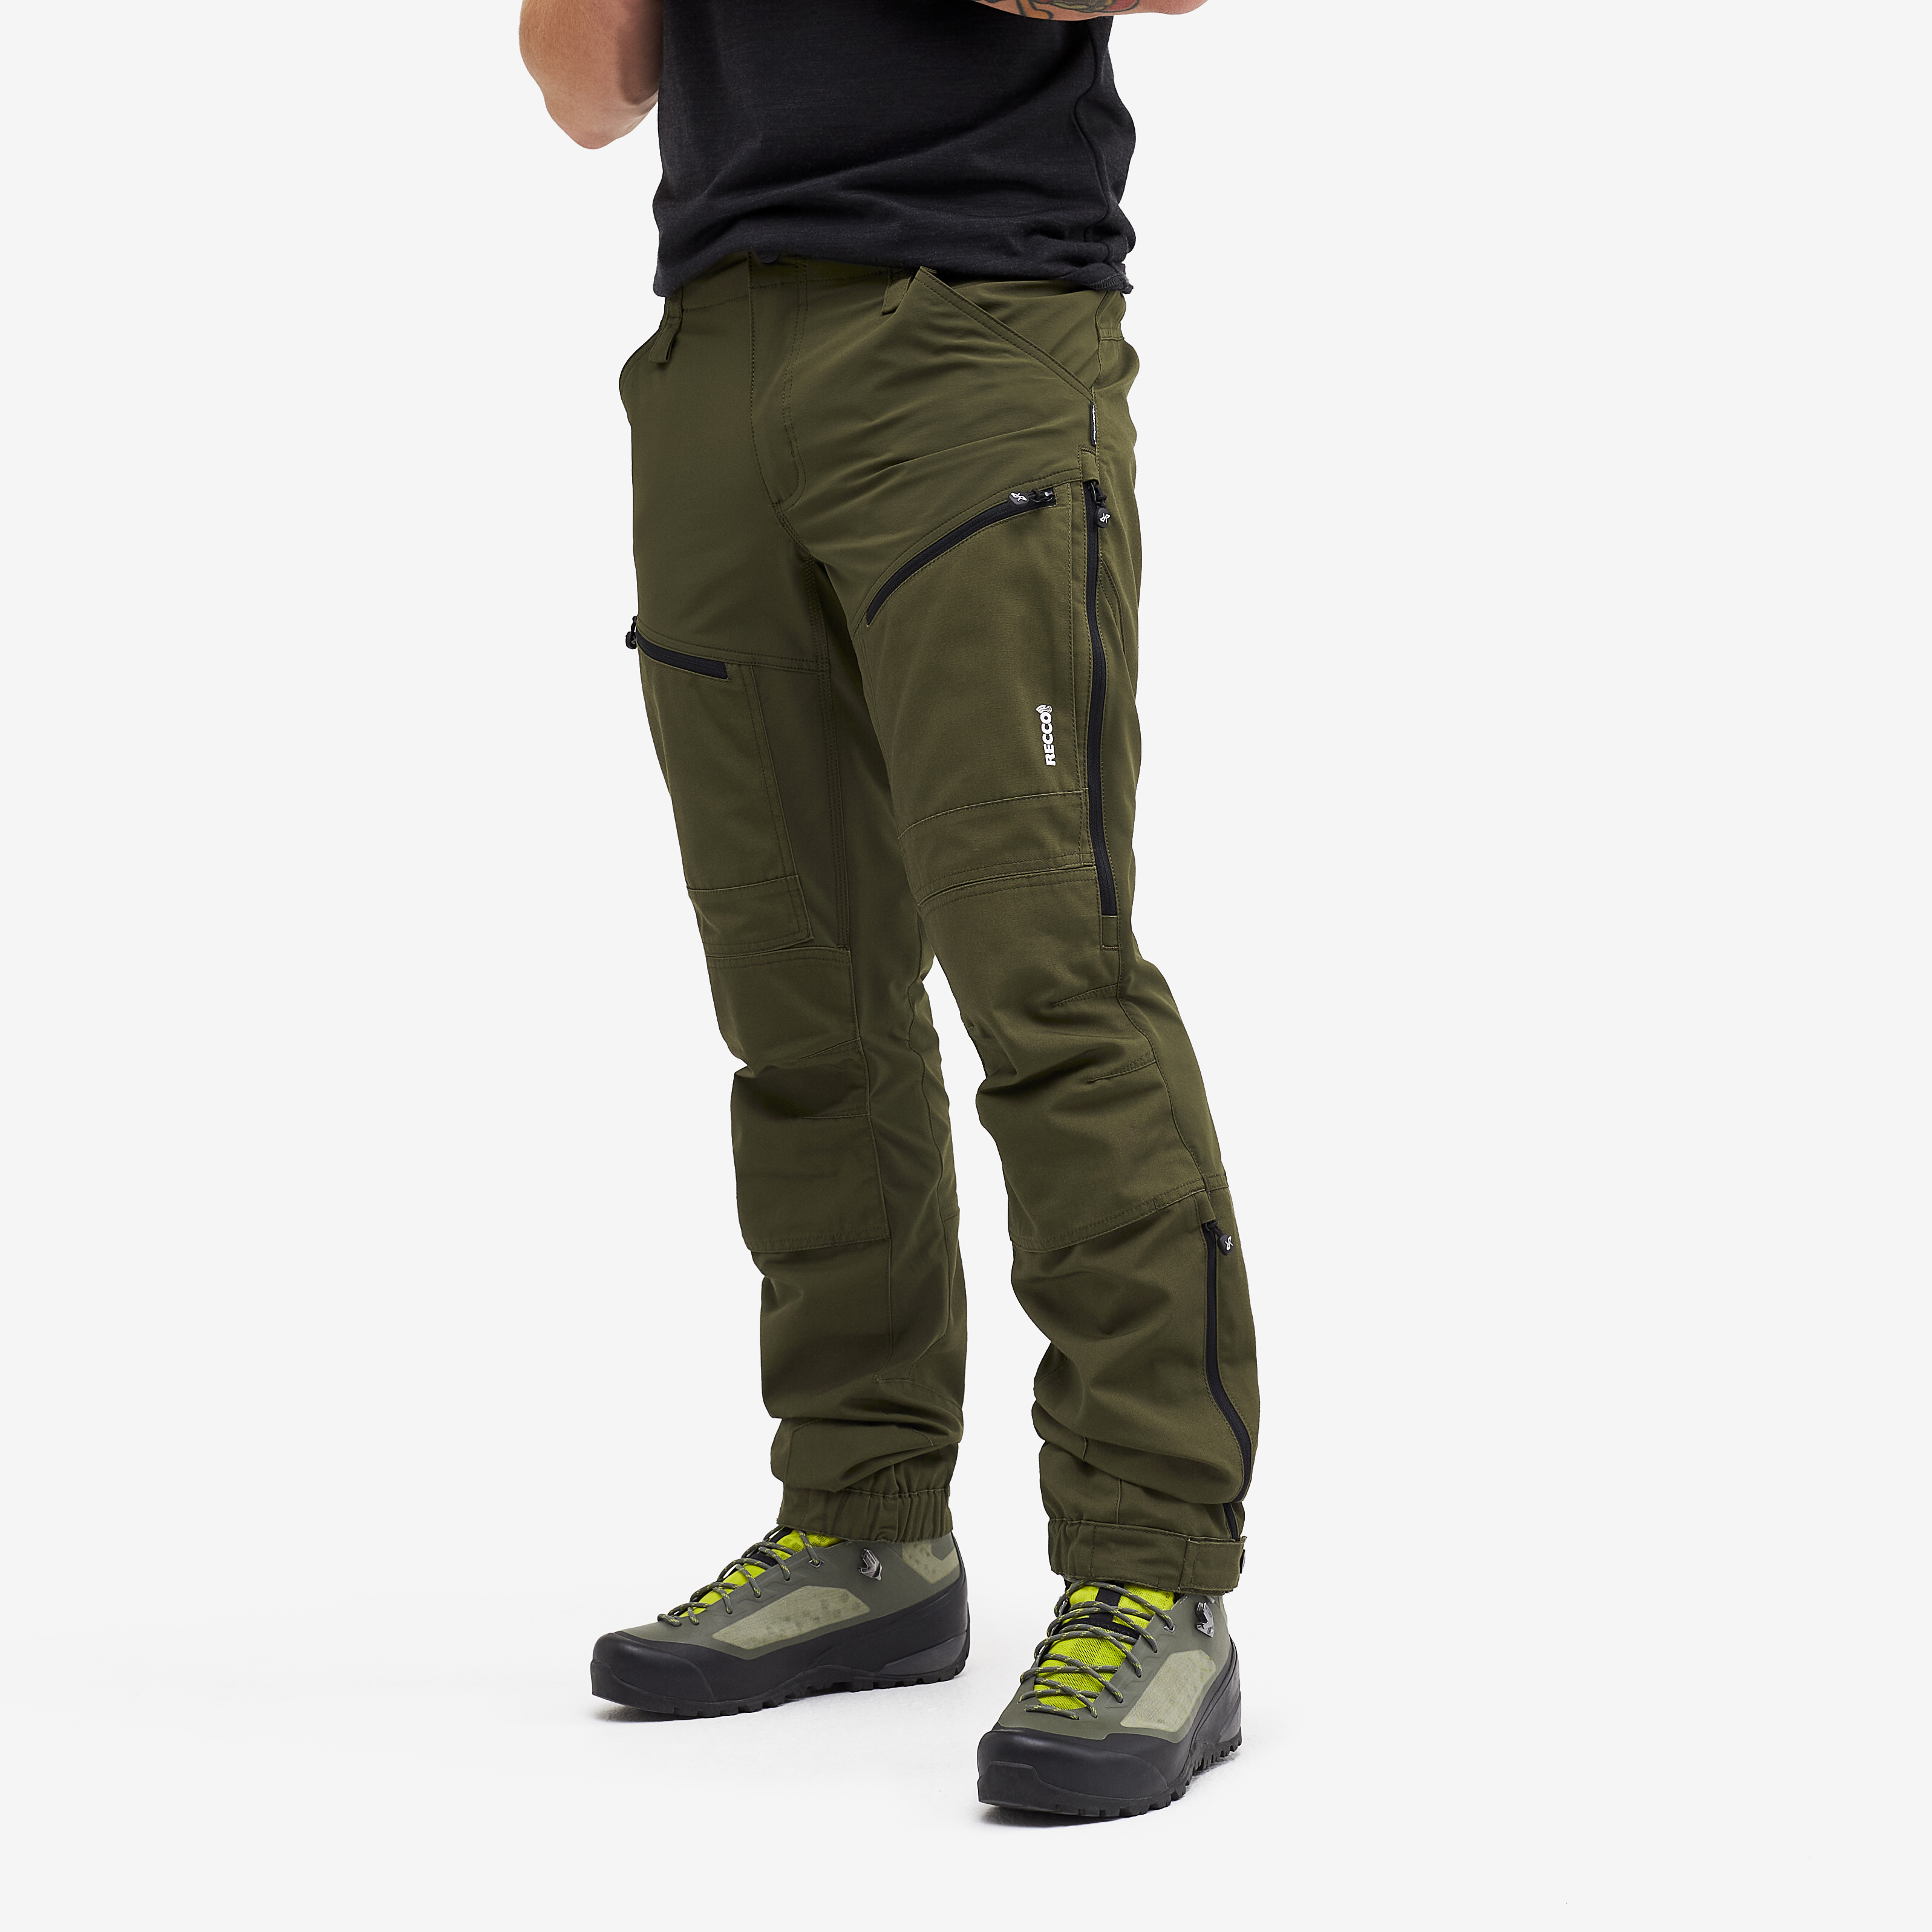 RVRC GP Pro Rescue hiking trousers for men in green